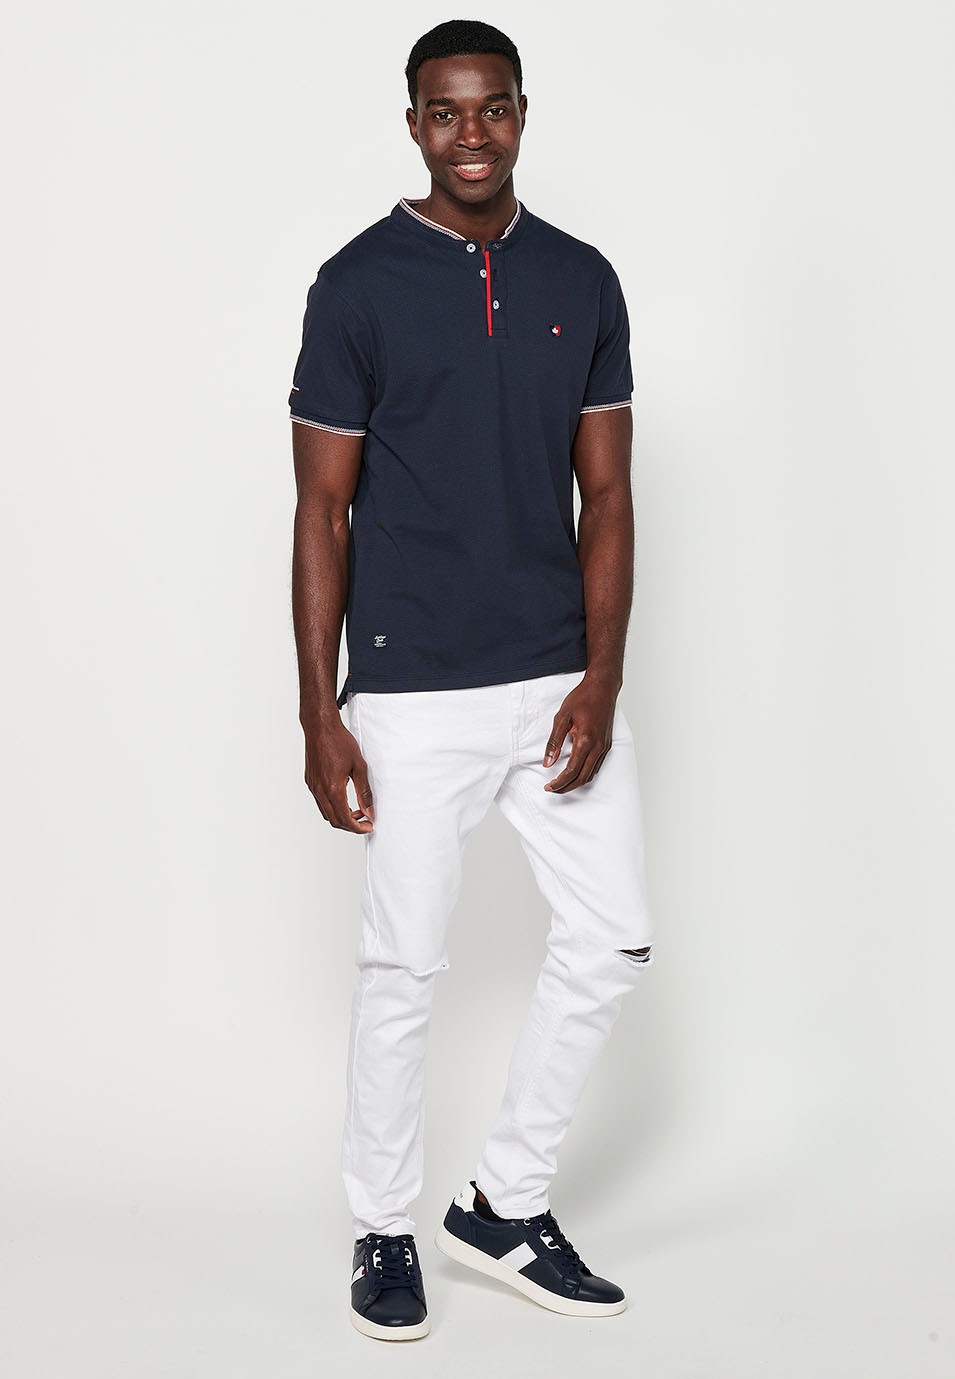 Short-sleeved cotton polo shirt with ribbed finish with round neck, buttoned opening and textured side slits in Navy Color for Men 1